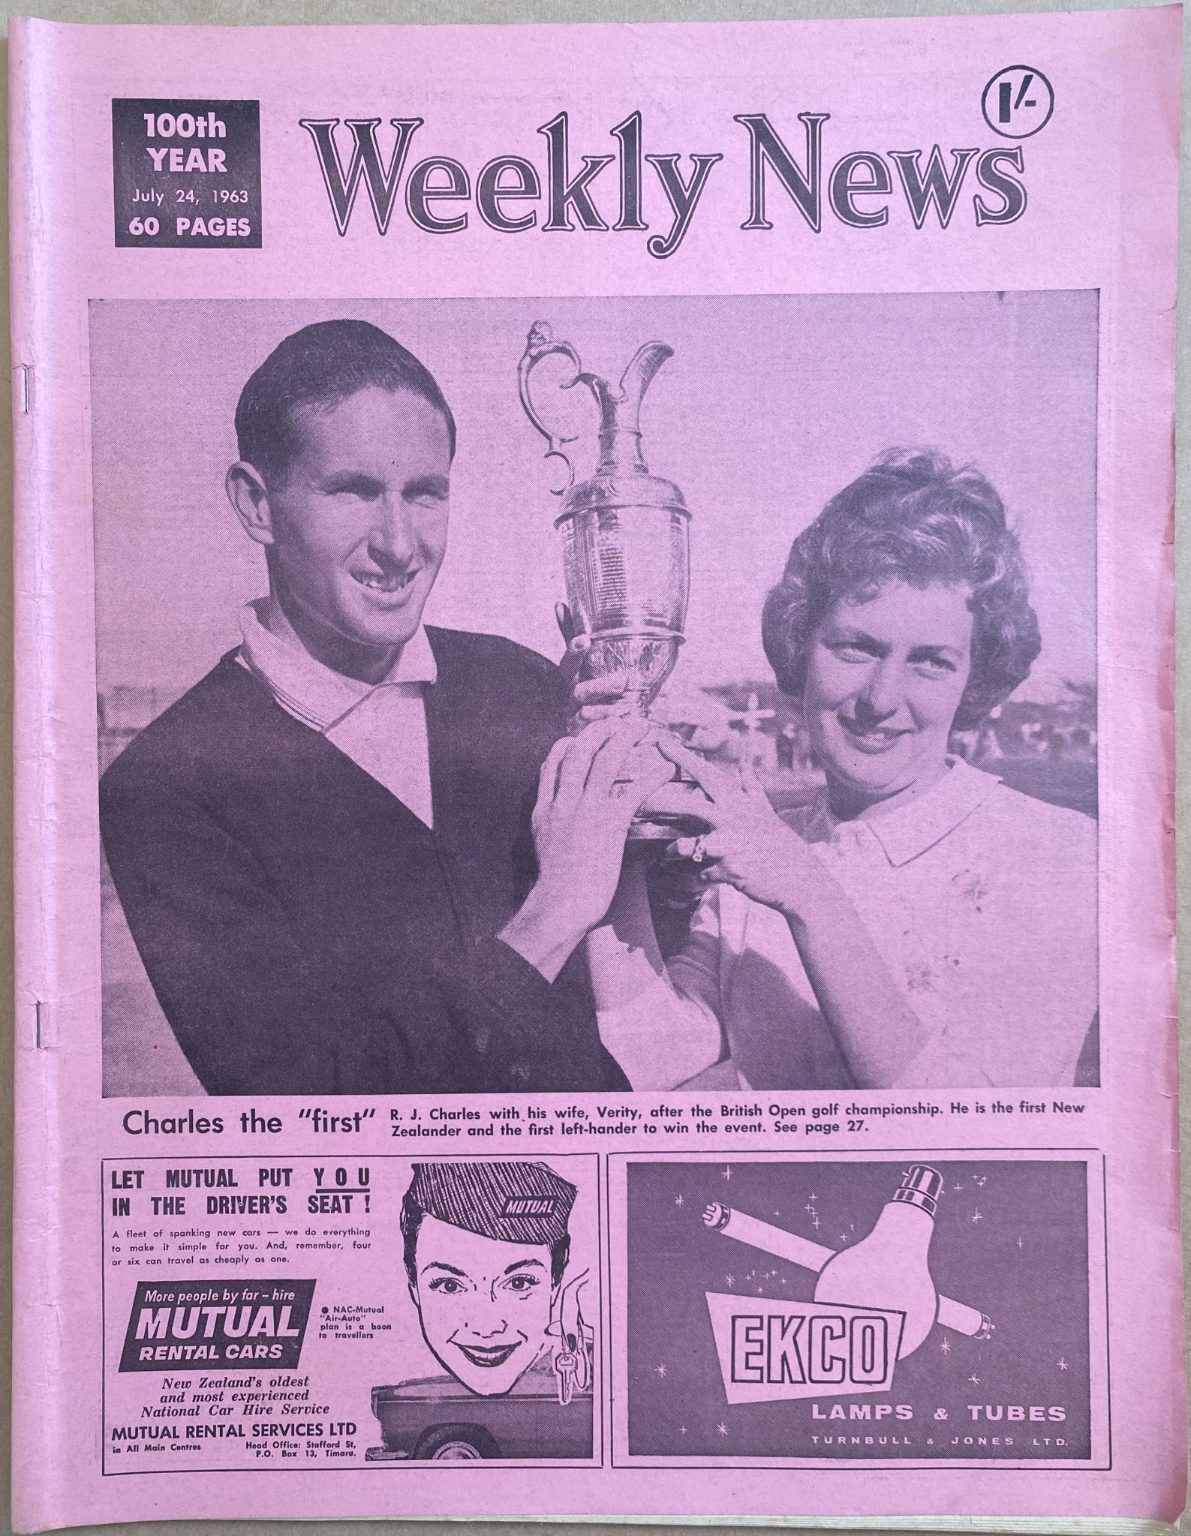 OLD NEWSPAPER: The Weekly News, No. 5200, 24 July 1963